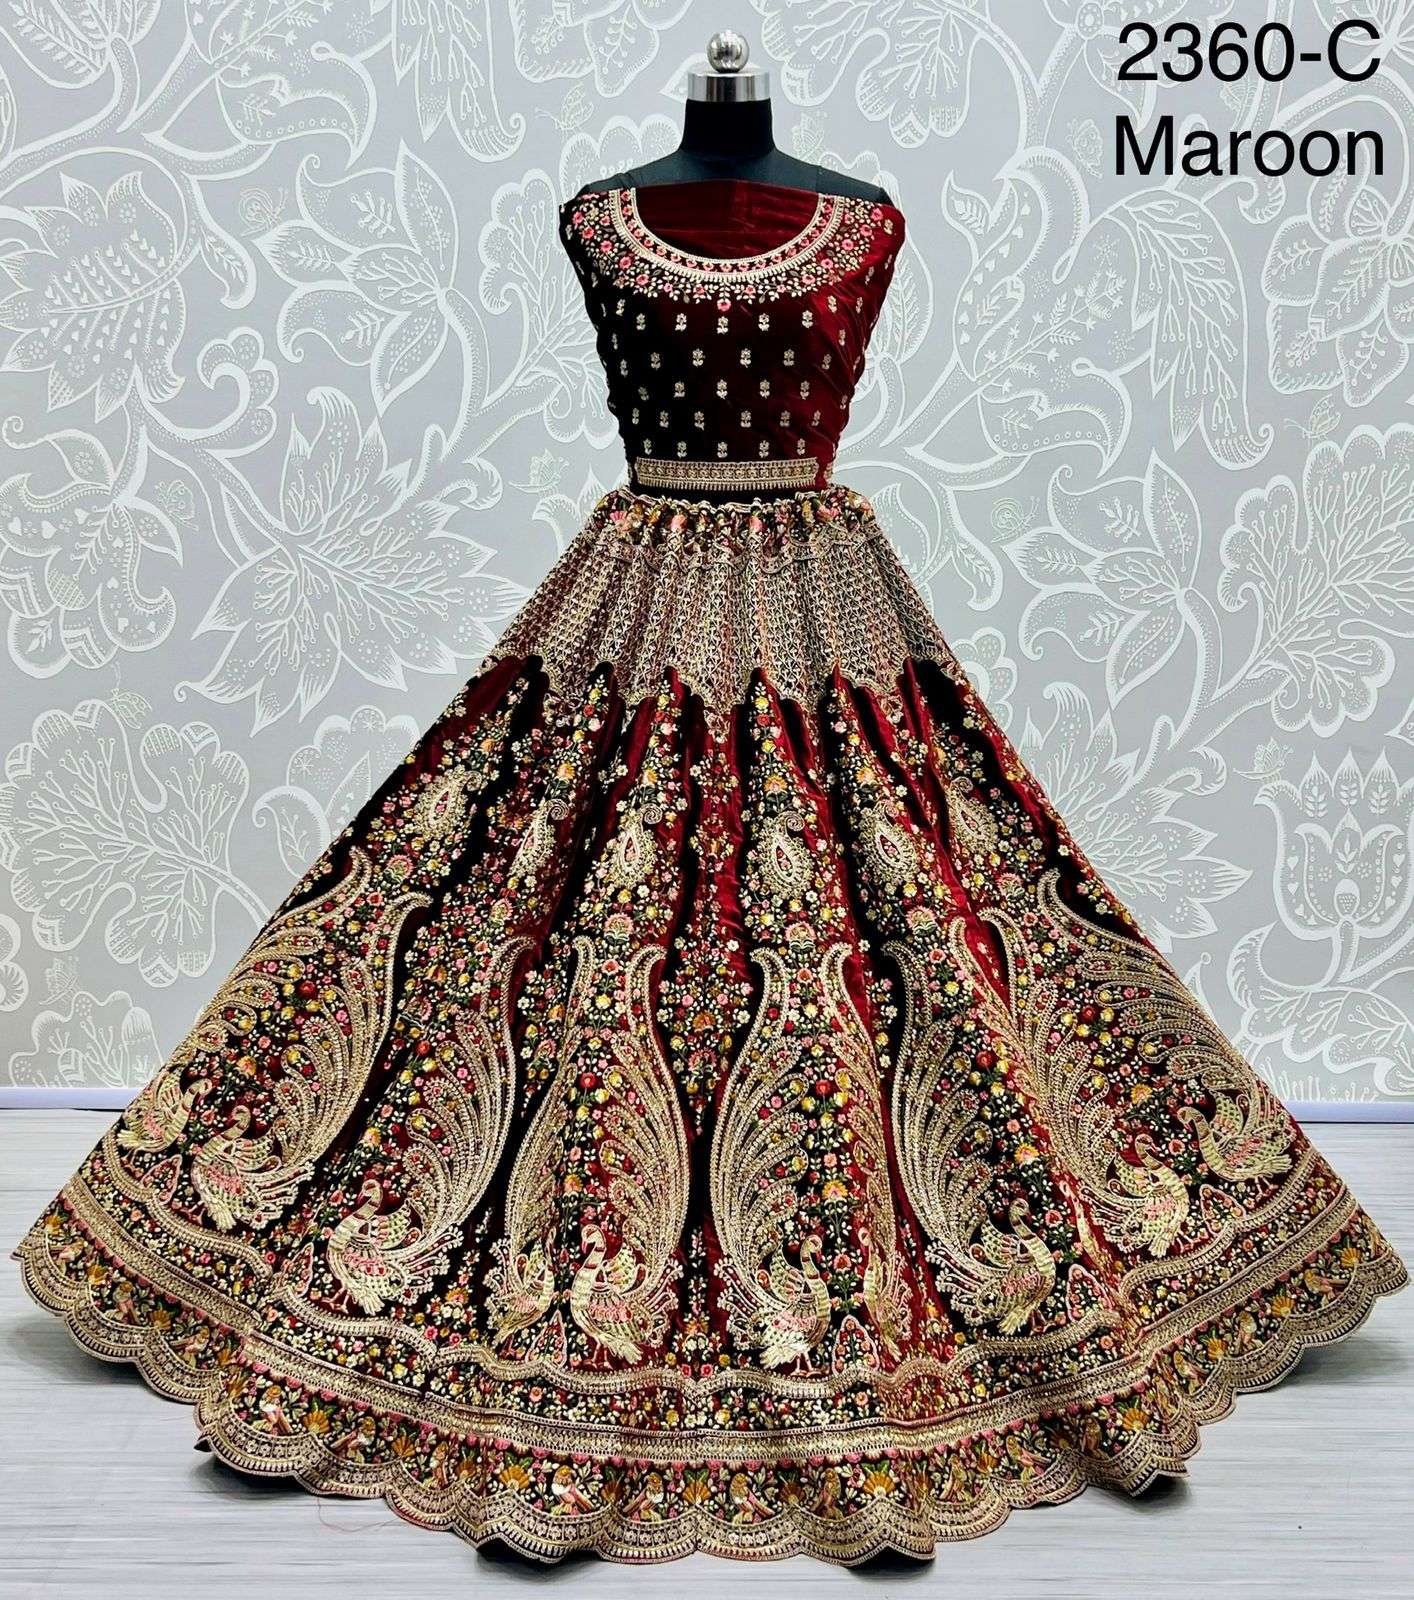 Queen's by Aakarshan - Bridal Wear Delhi NCR | Prices & Reviews